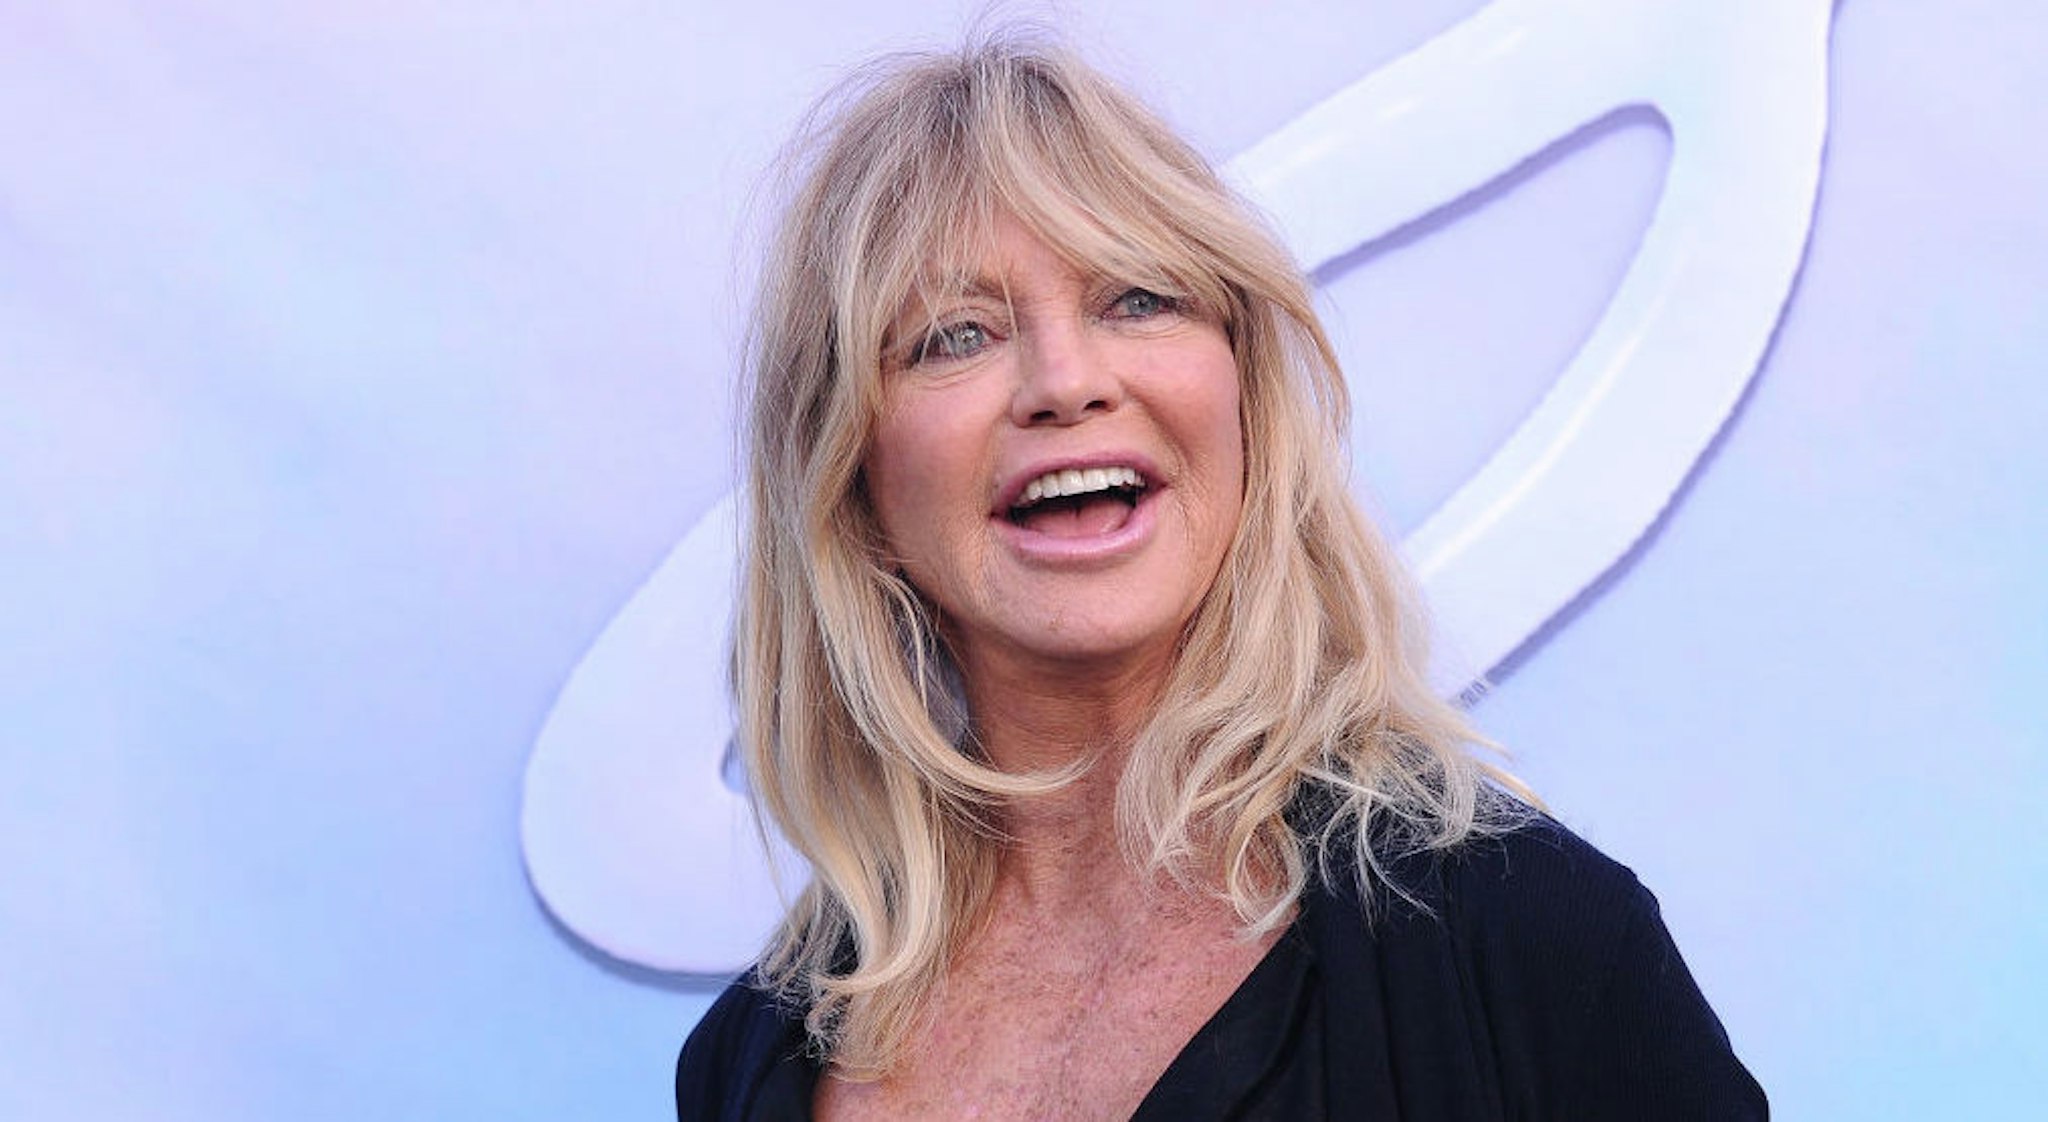 Goldie Hawn Nipples Big - Goldie Hawn Talks Staying Out Of Politics: 'I Stay In My Lane,' We Should  Entertain 'For All People' | The Daily Wire